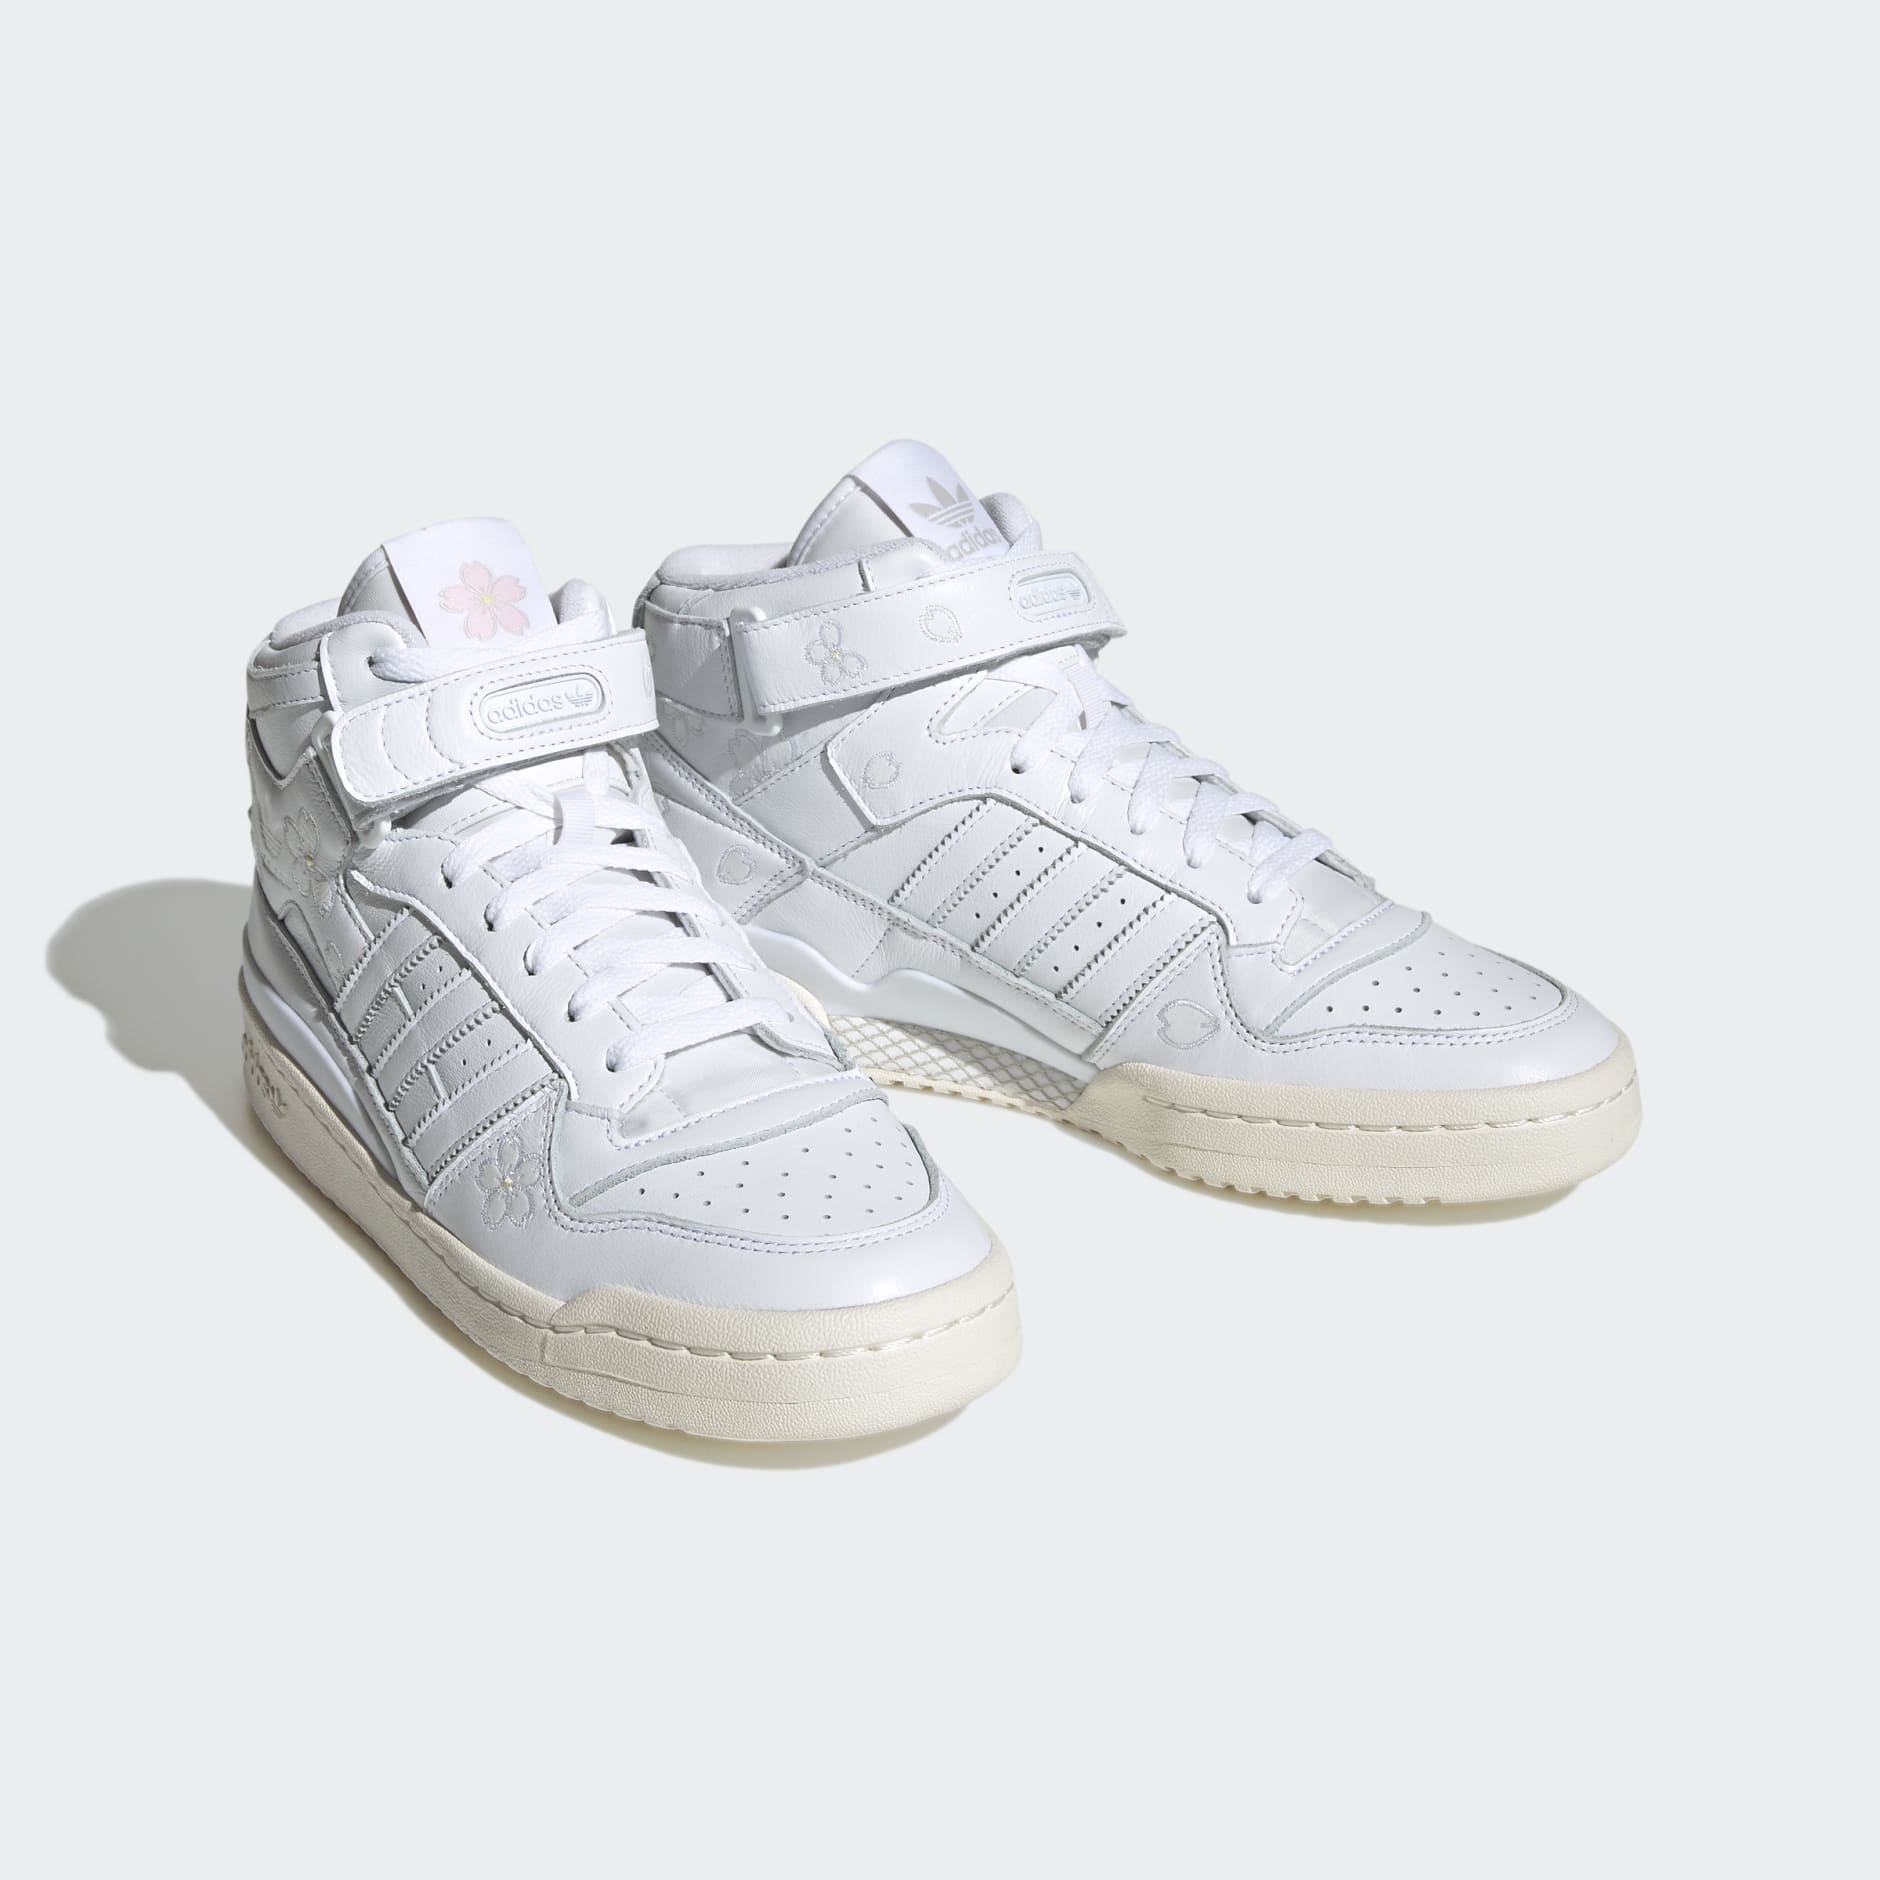 Shoes - Forum Mid Hanami Shoes - White | adidas South Africa